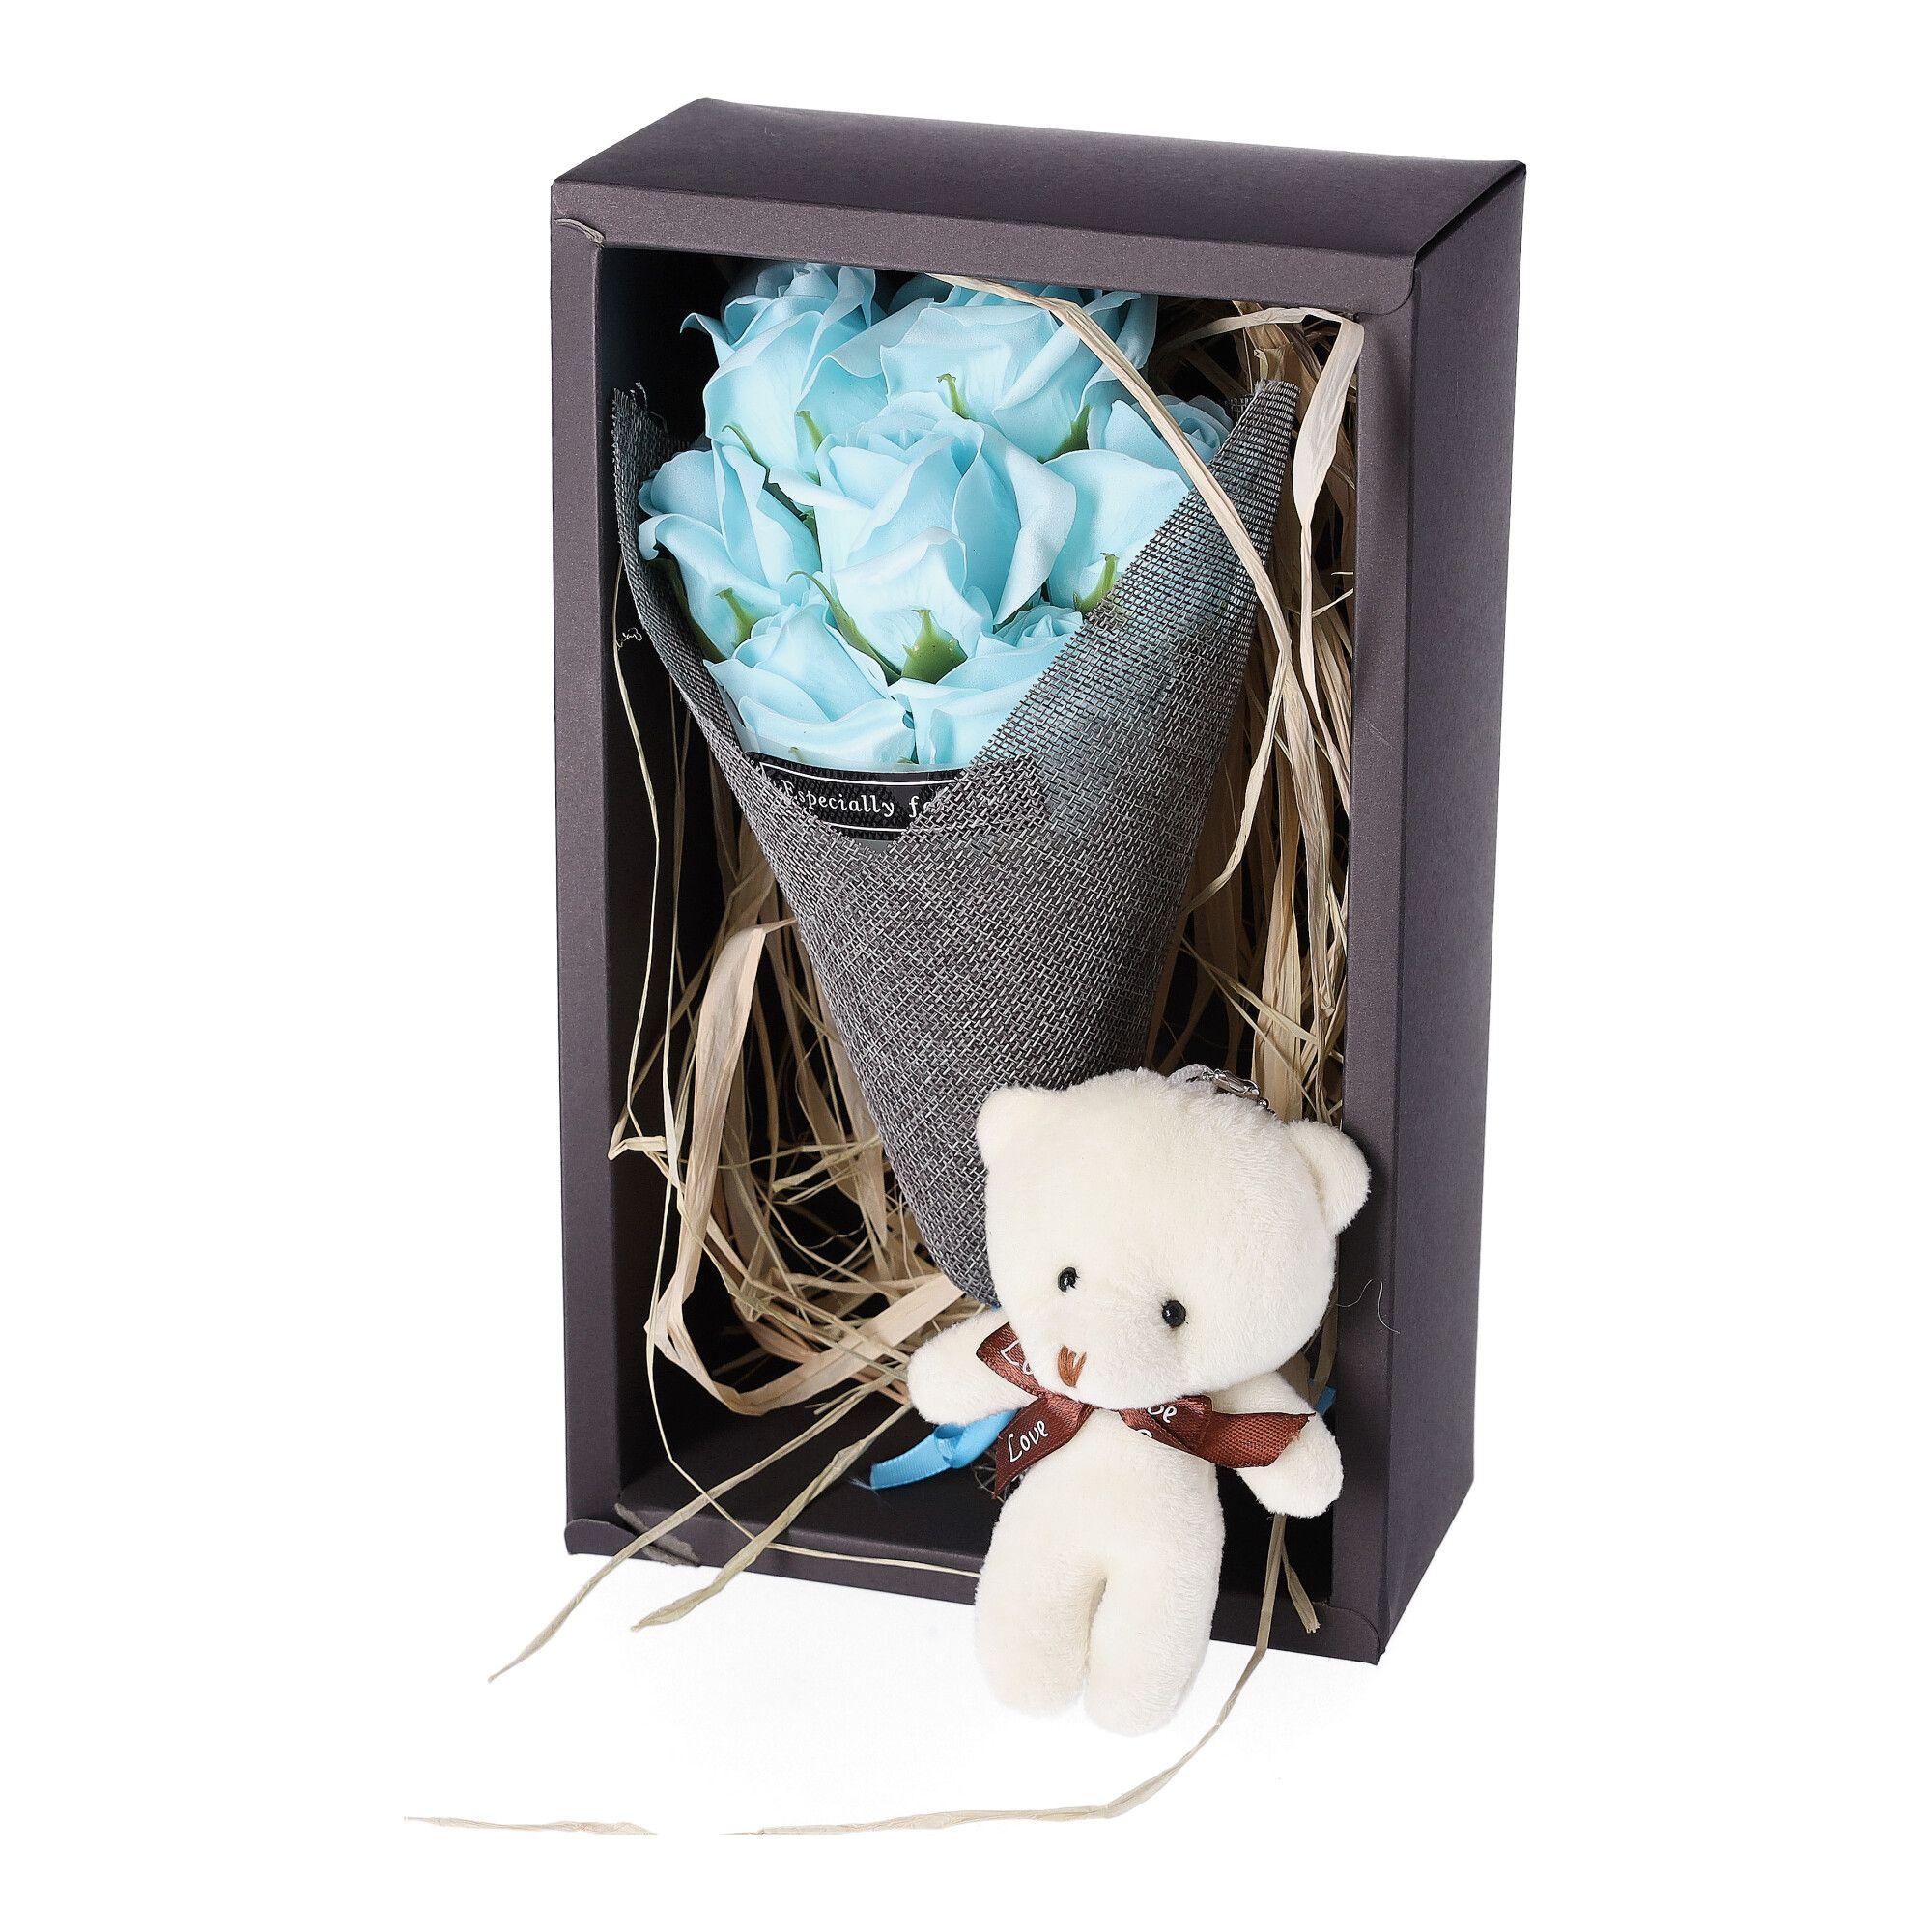 Box of soap roses - blue